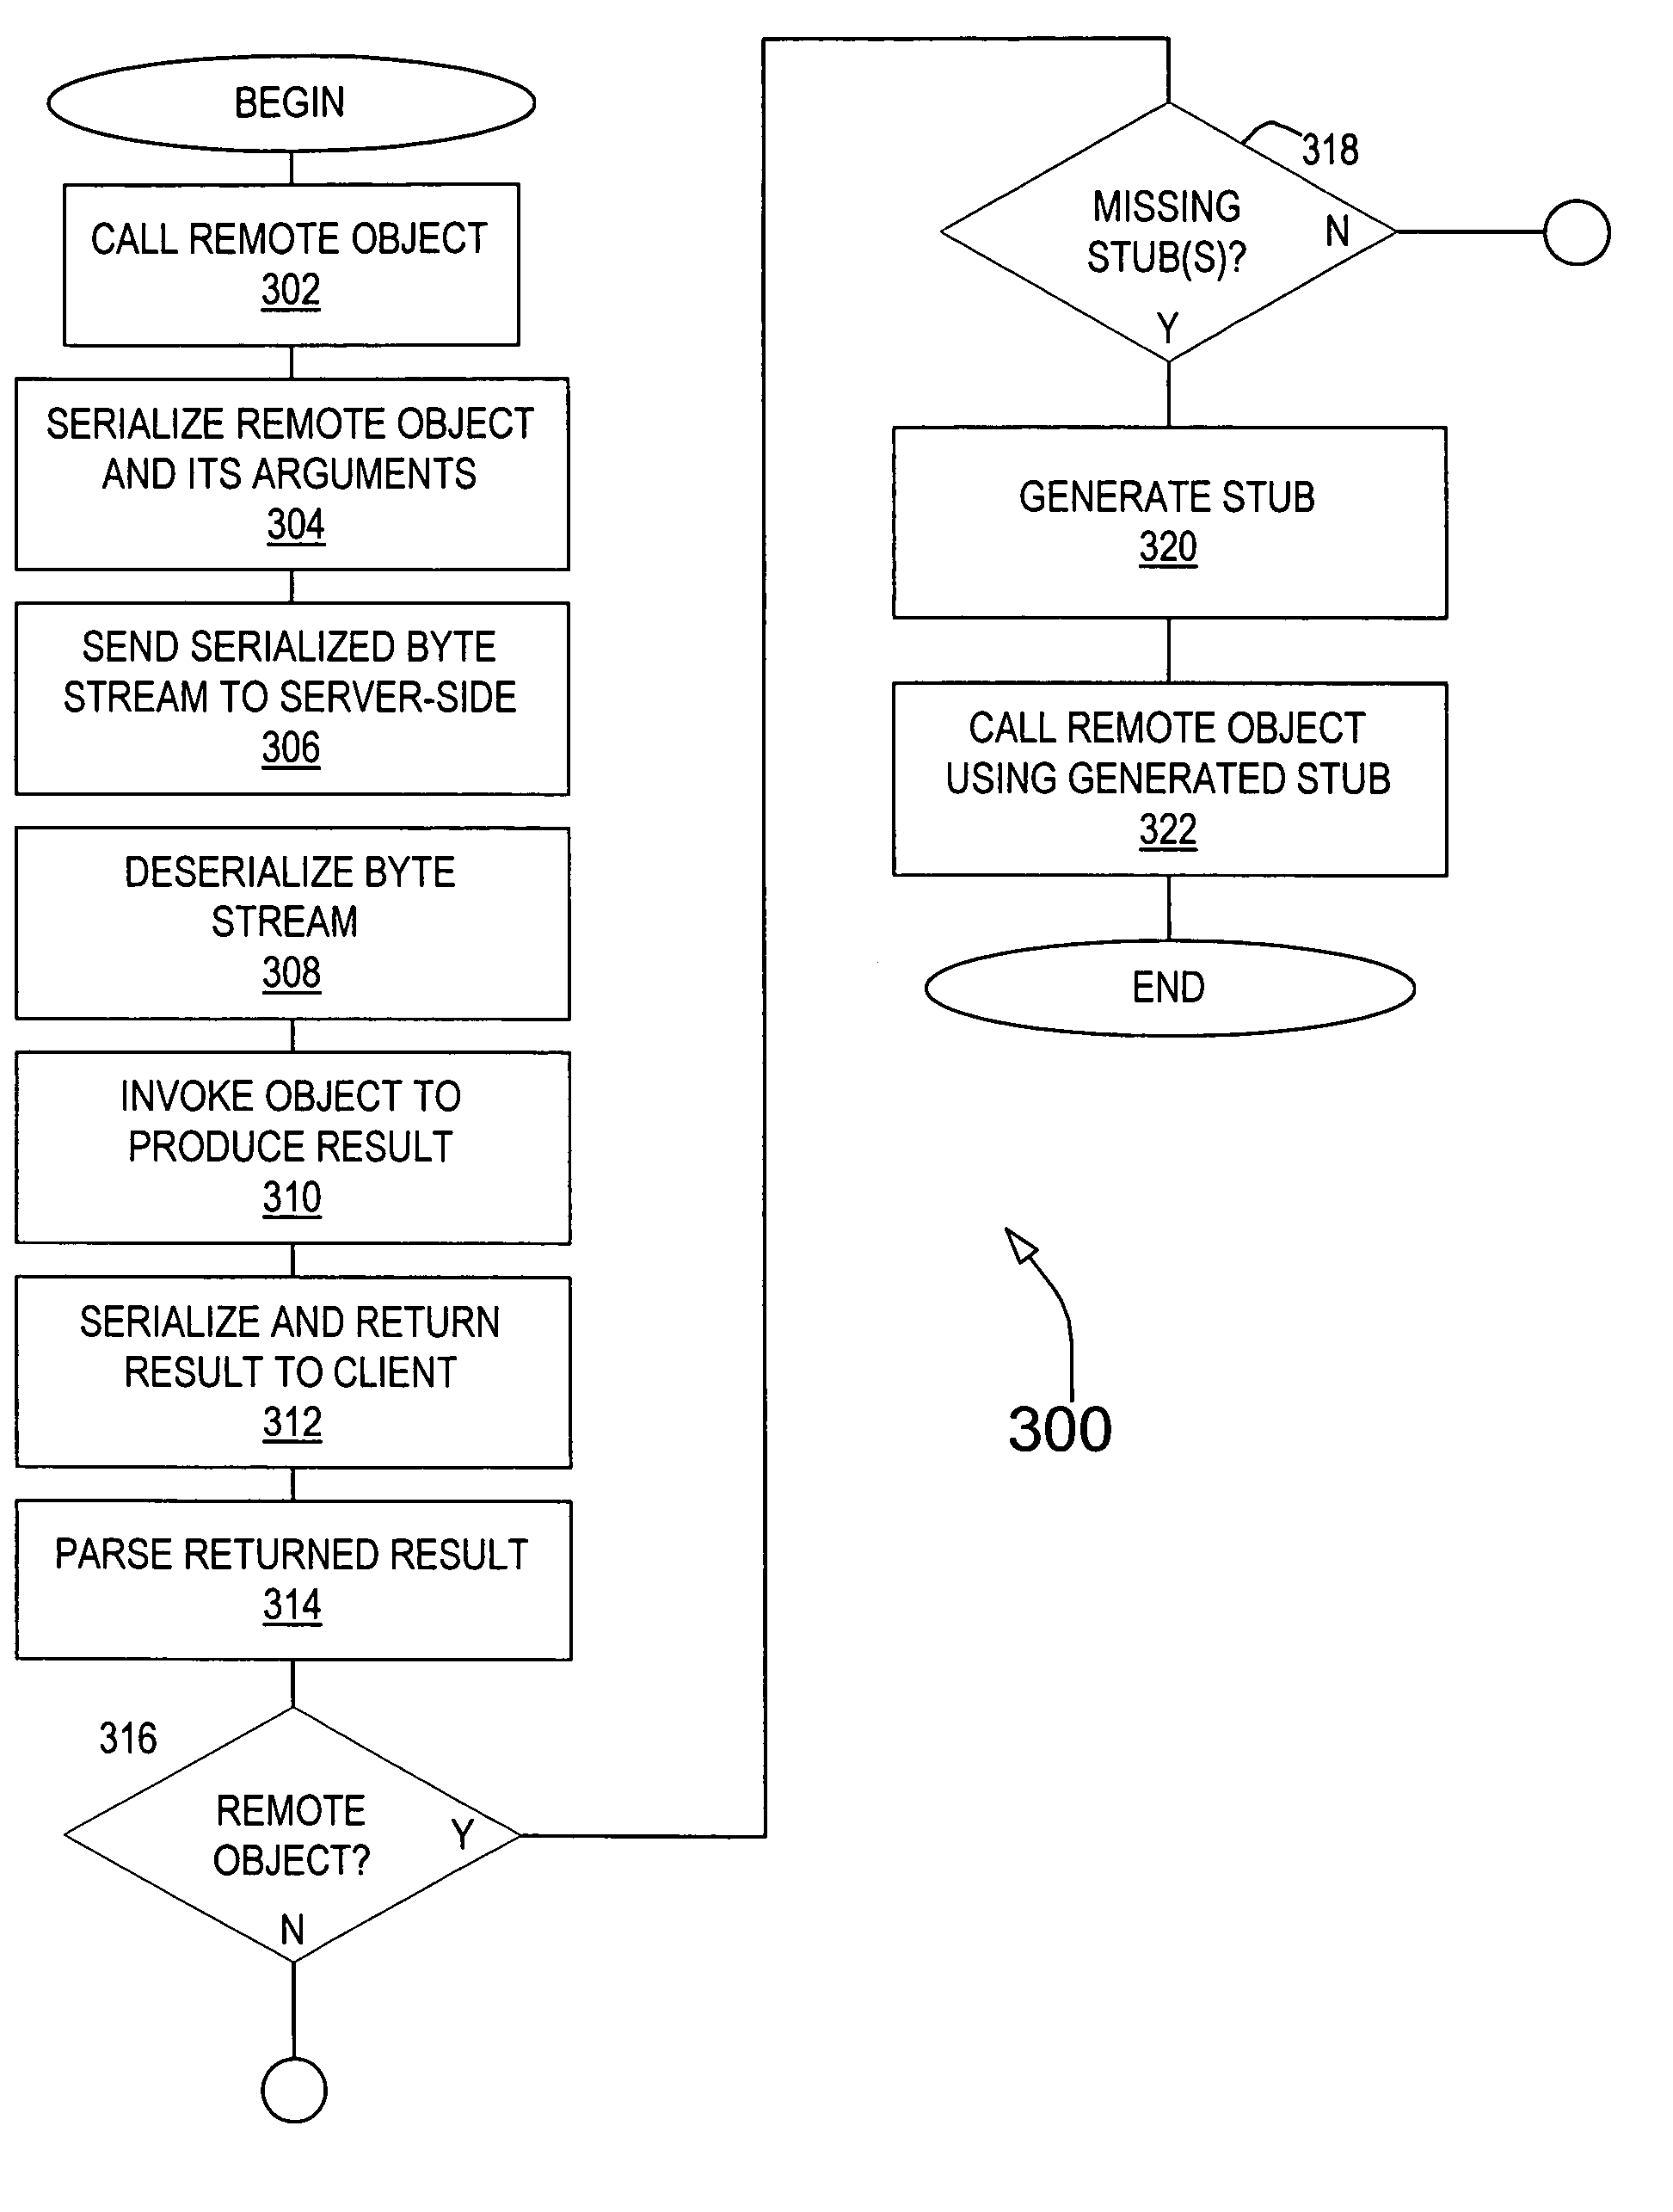 Communicating with remote objects in a data processing network